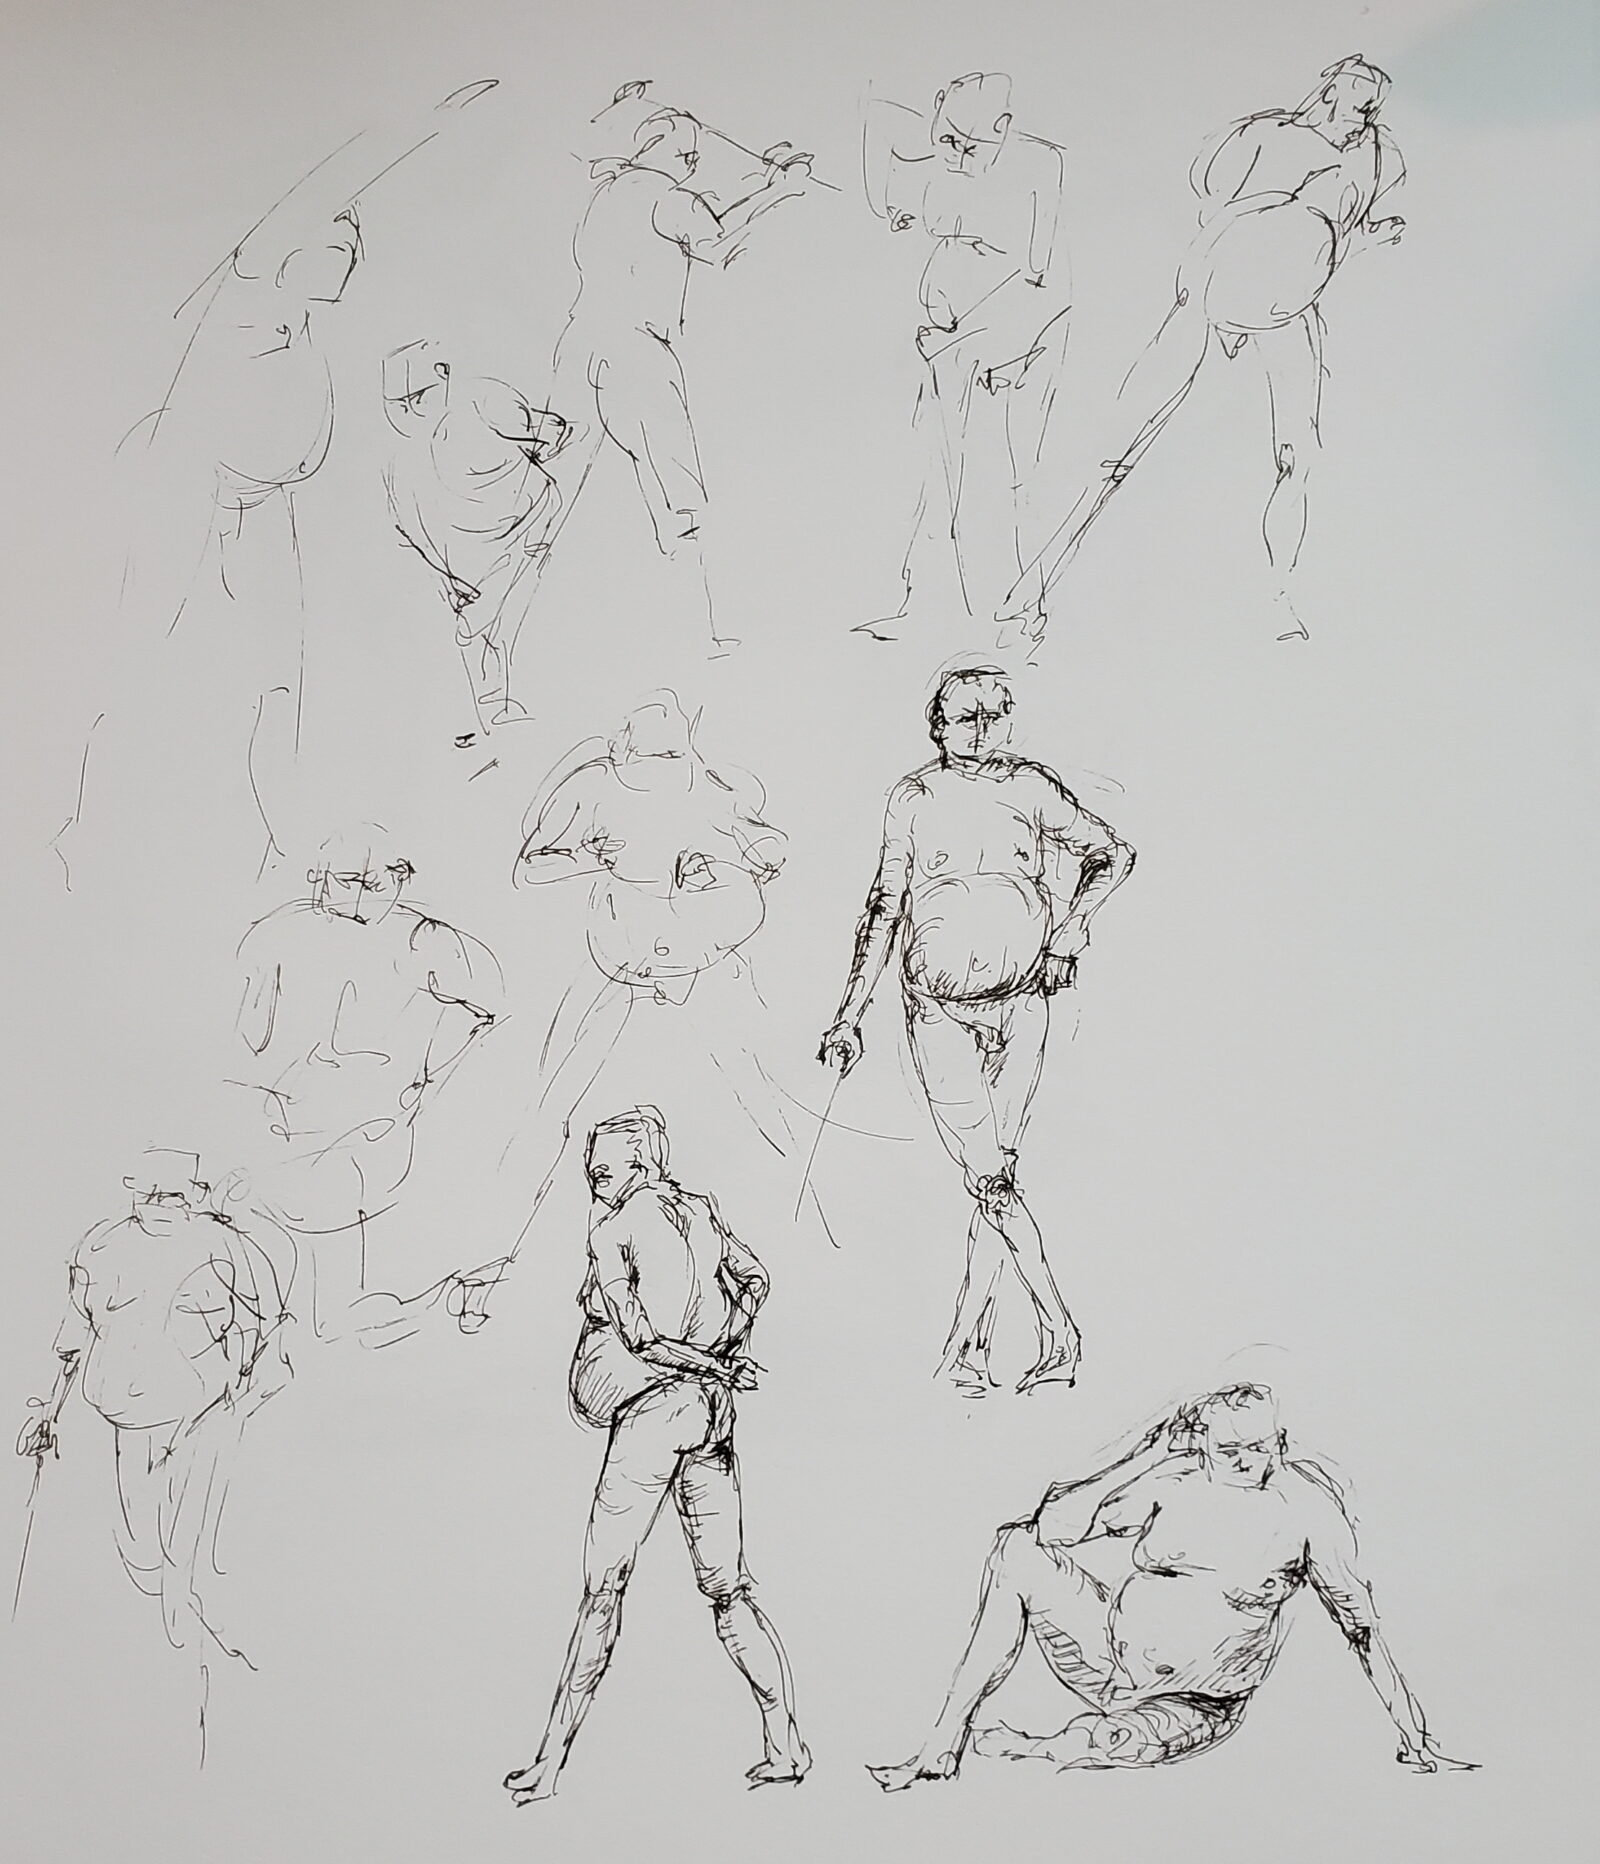 Art works figure drawing session 1/25/21